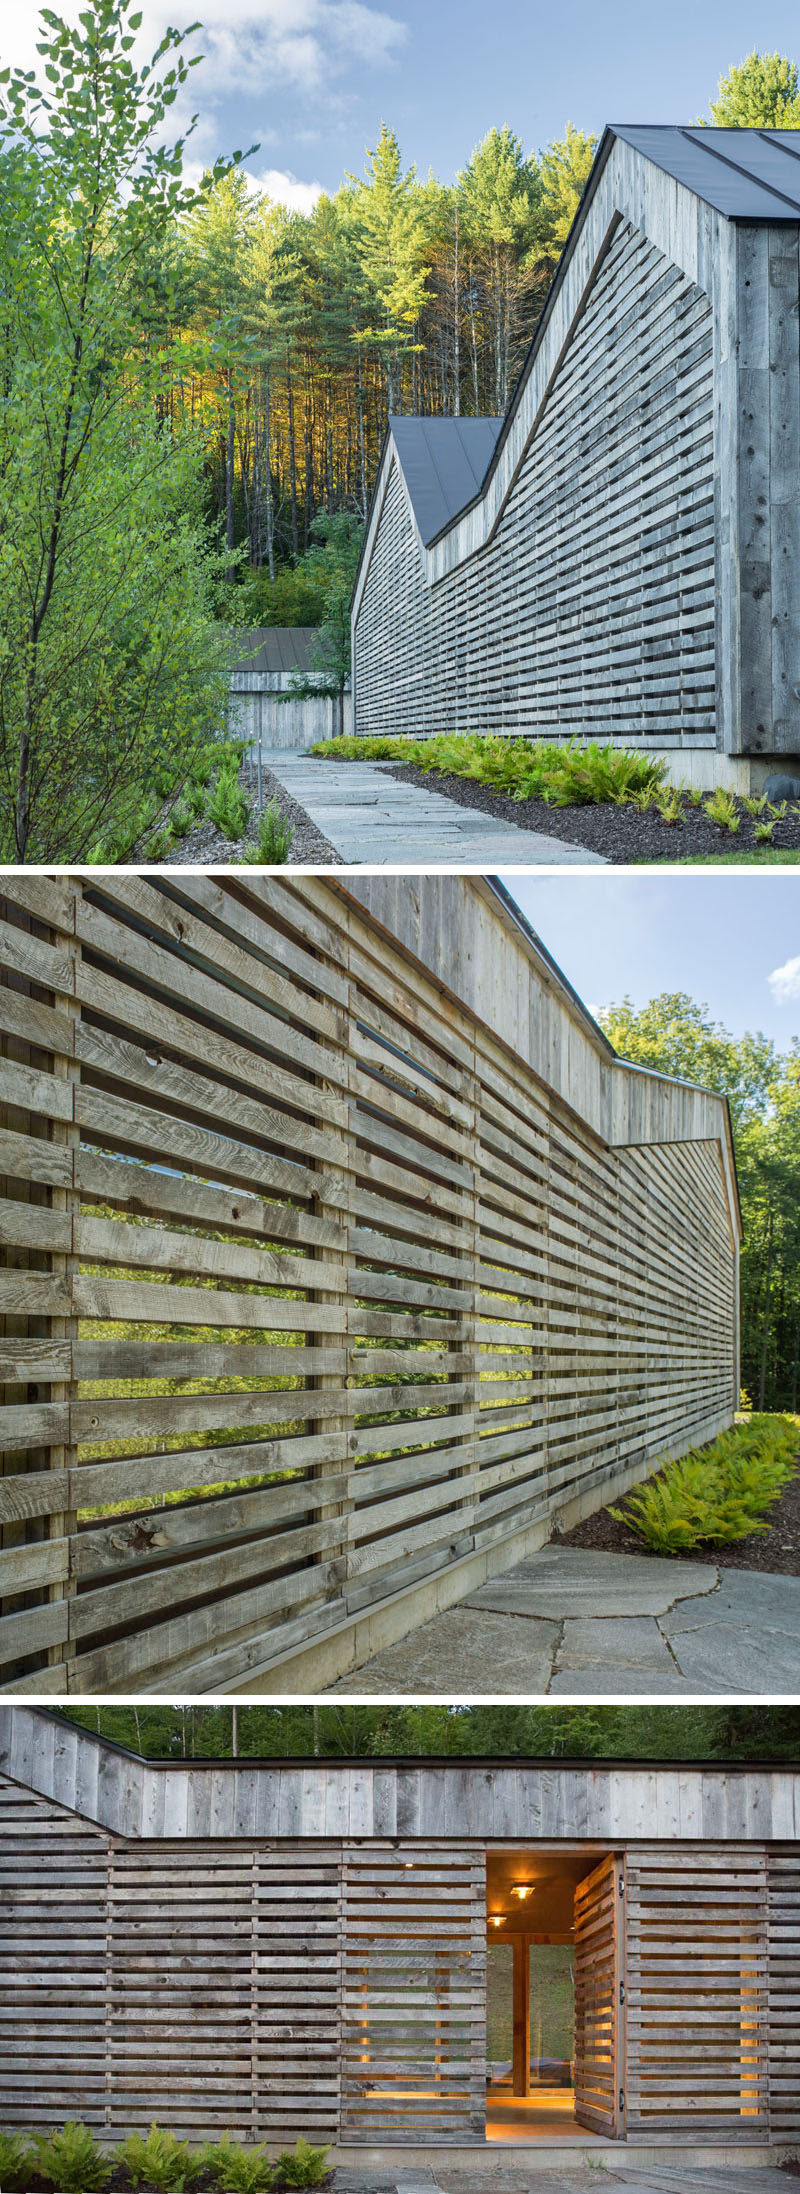 This modern house is clad in a siding composed of re-purposed snow fencing, so that it already has the natural beauty of the weathered boards. The front entrance is hidden away within the siding, making it almost invisible when walking past, with only a small stone path telling you where it is.